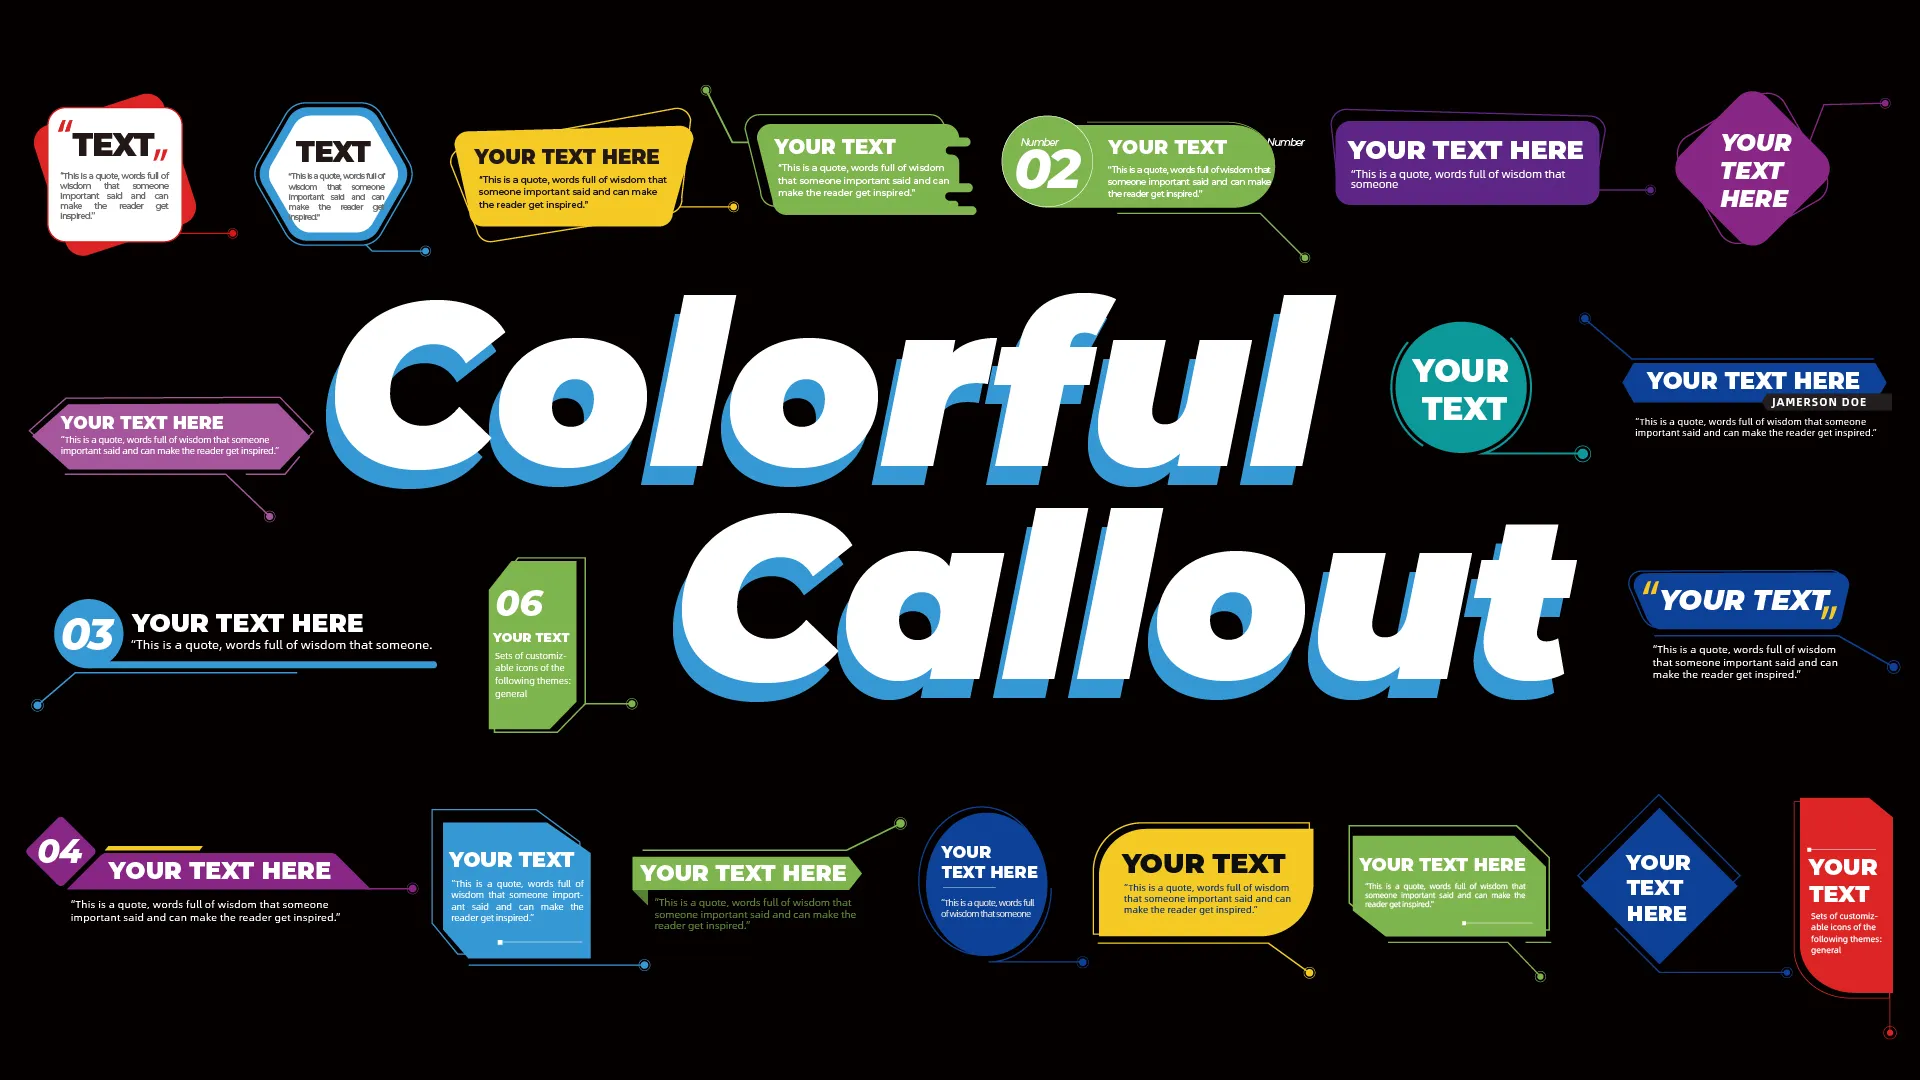 Colorful Callout